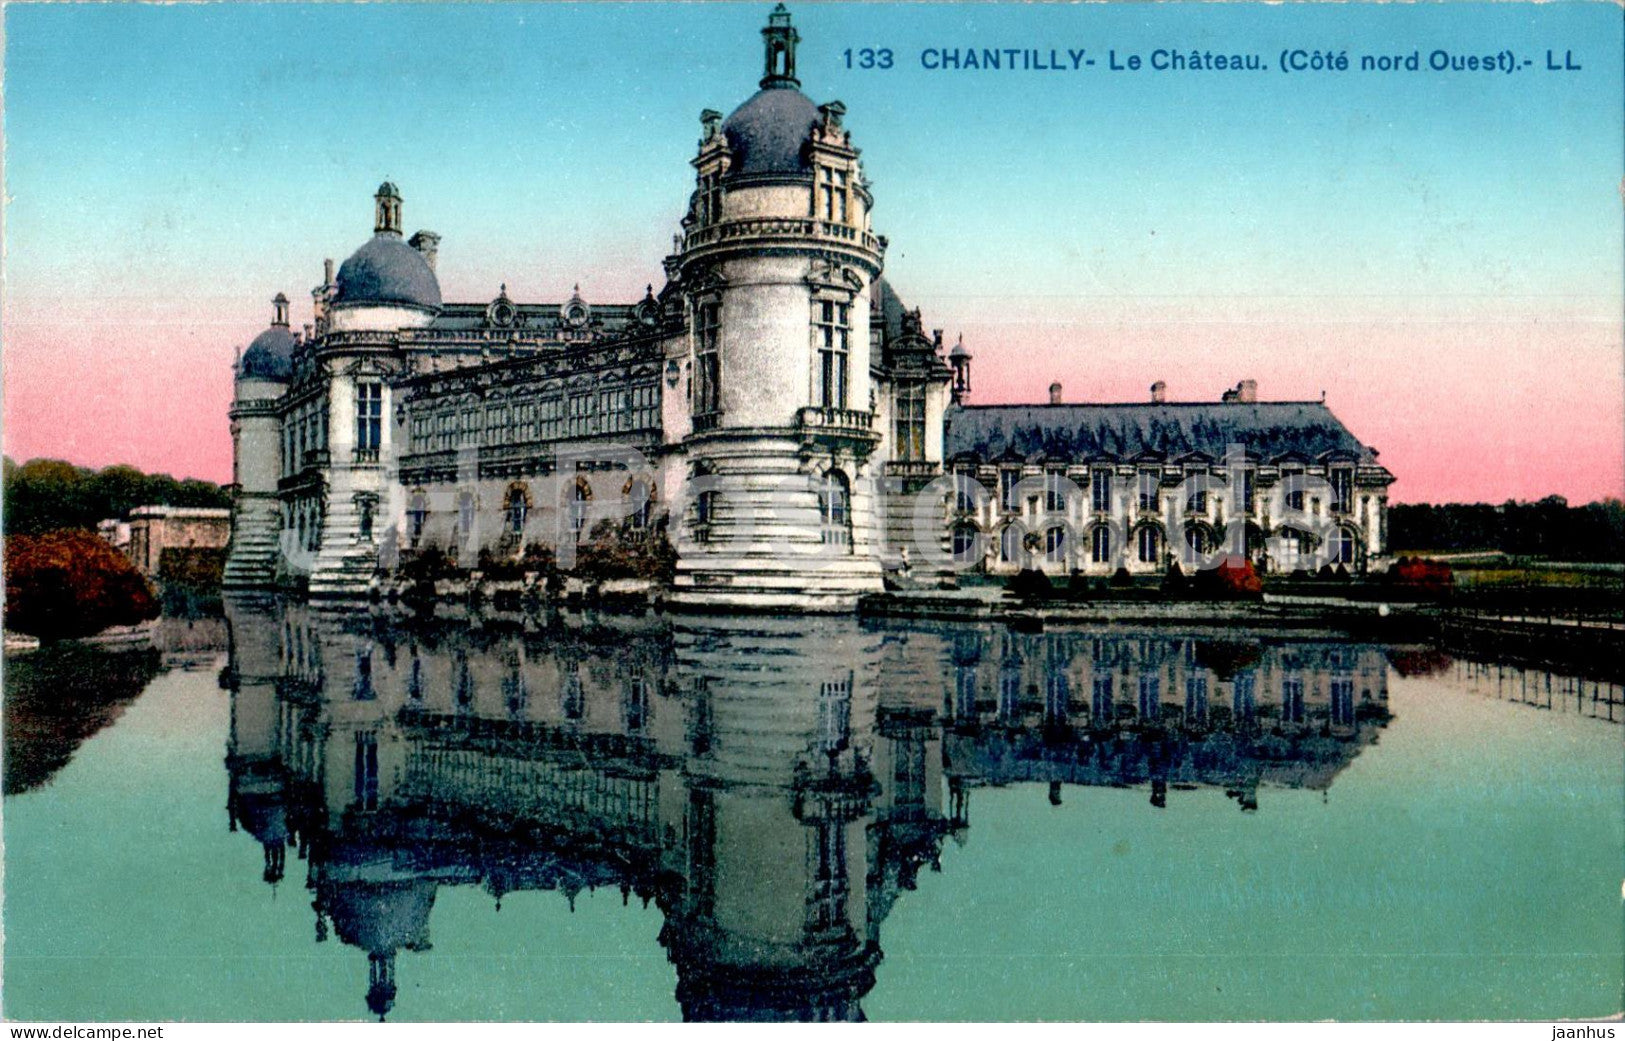 Chantilly - Le Chateau - Cote Nord Ouest - castle - 133 - old postcard - 1929 - France - used - JH Postcards